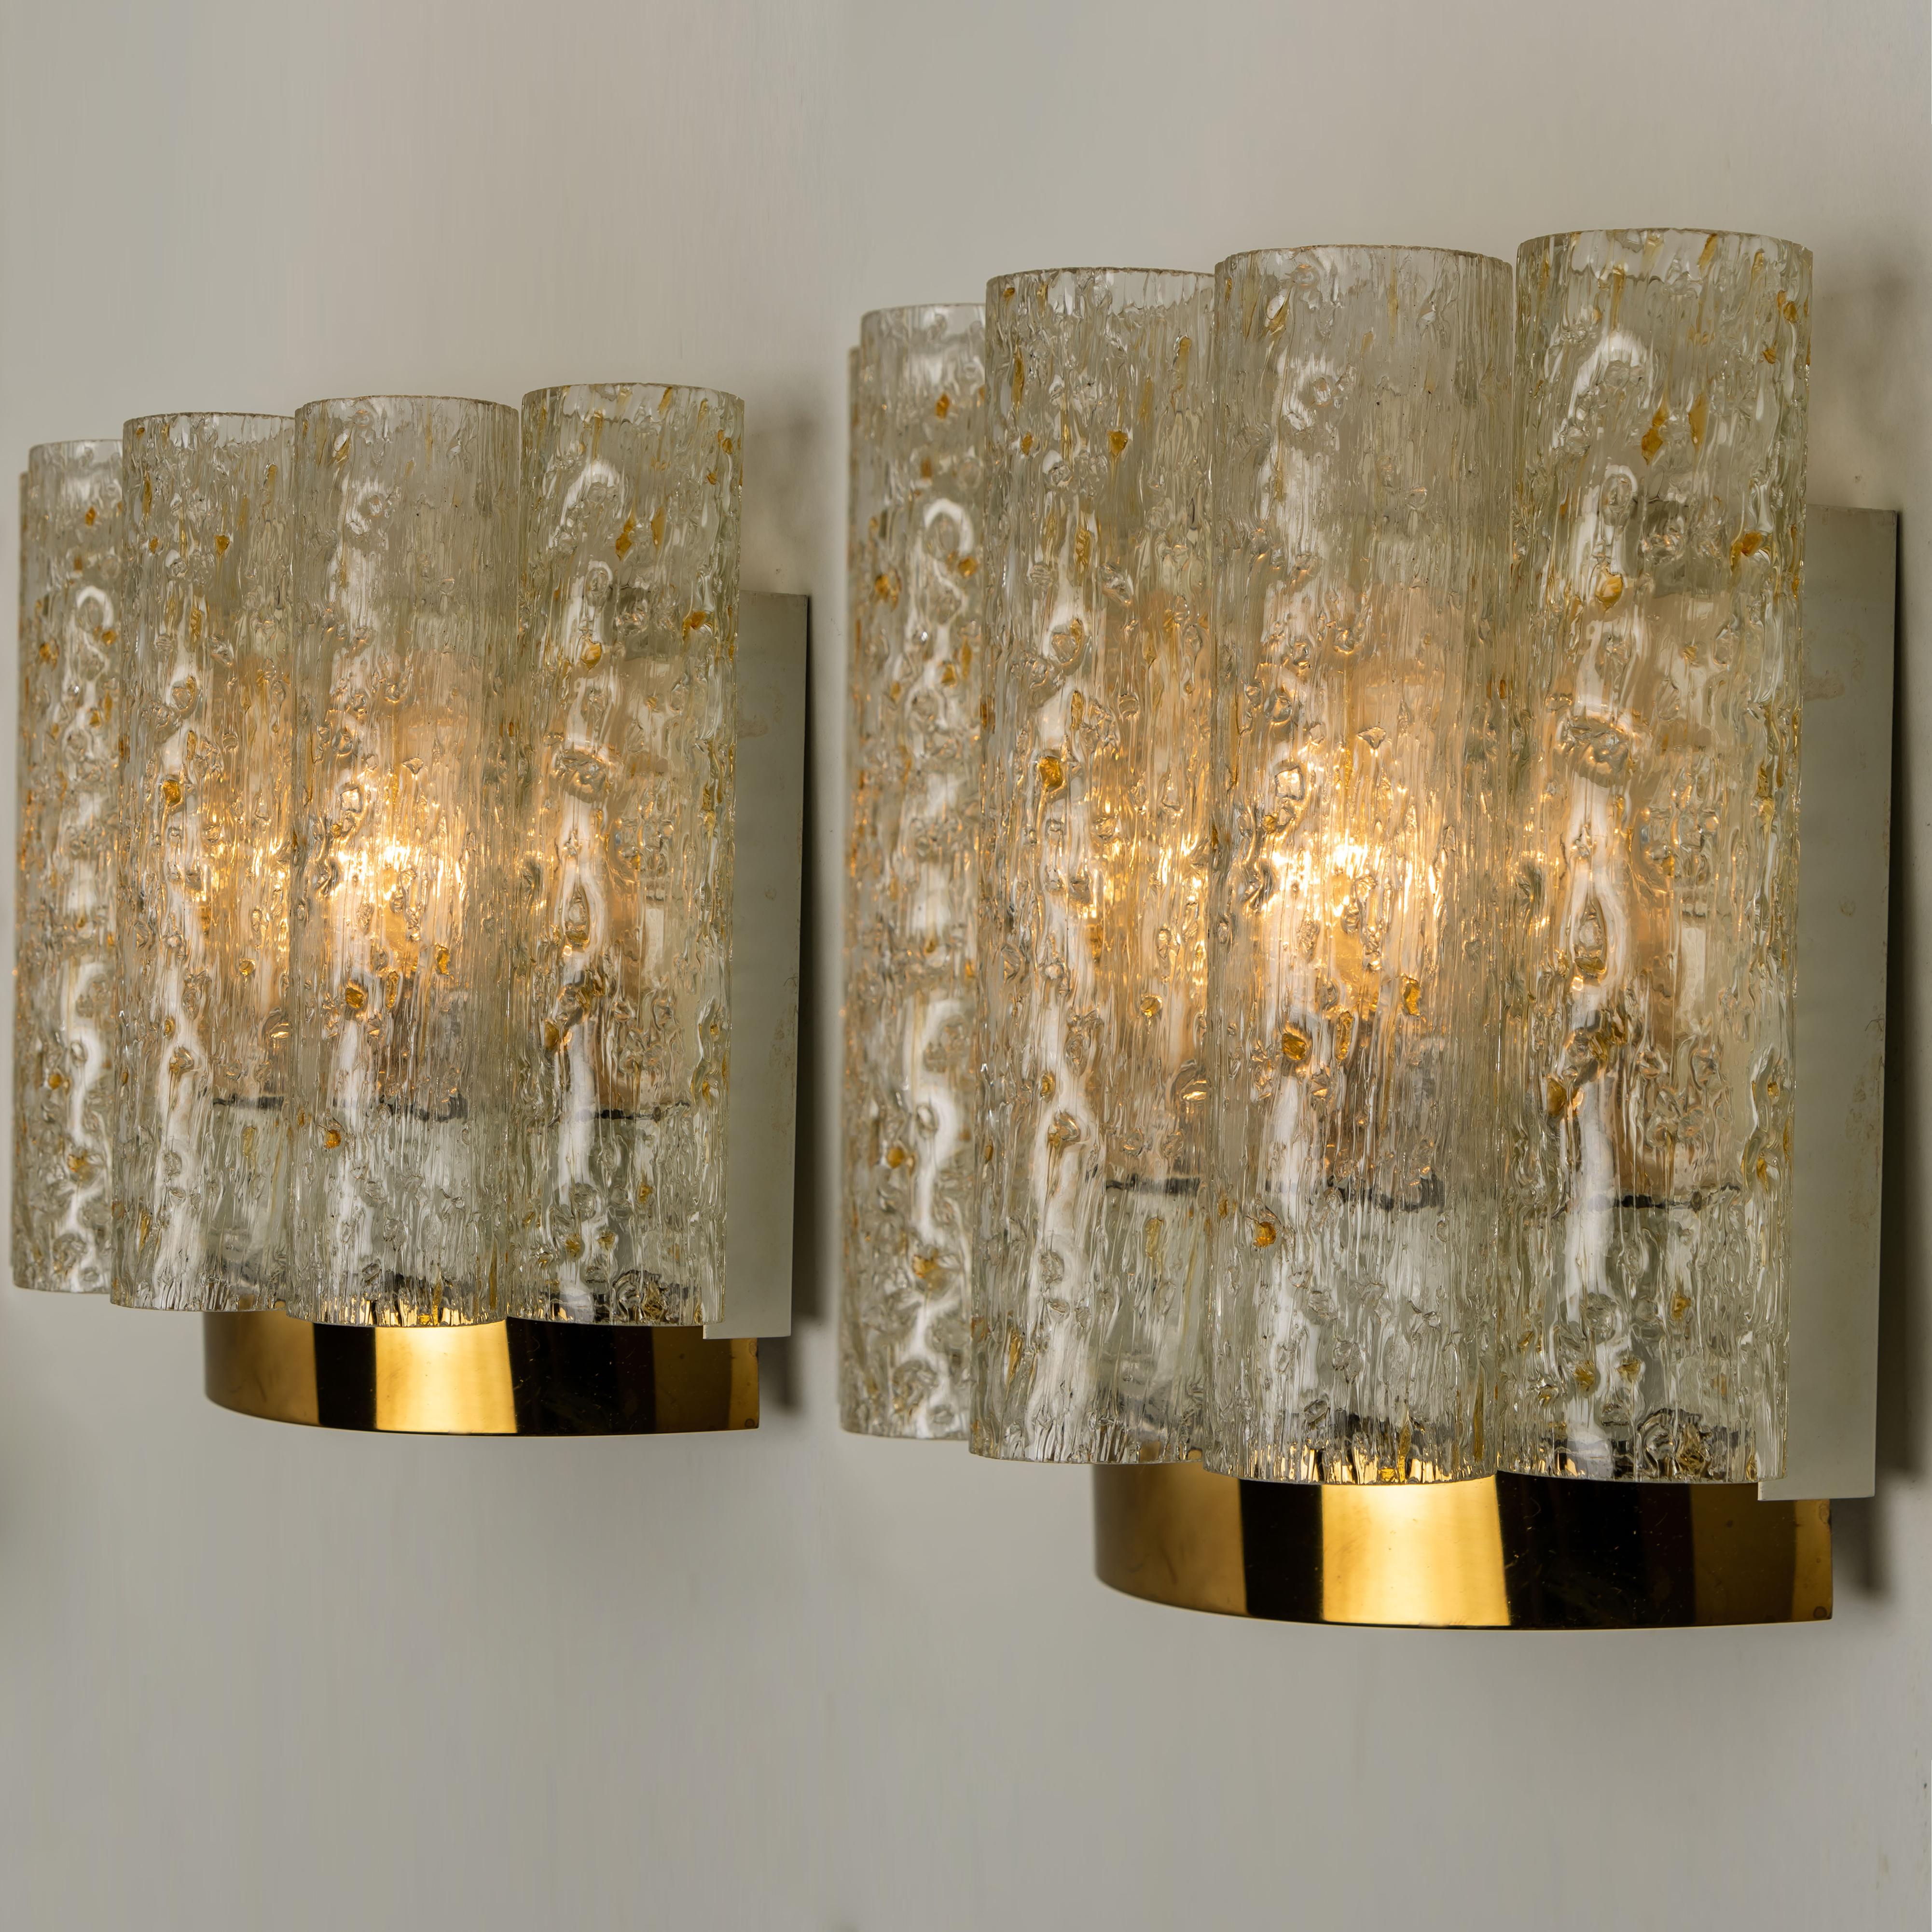 Mid-Century Modern Pair of Doria Wall Lamps in Brass and Glass, 1960s For Sale